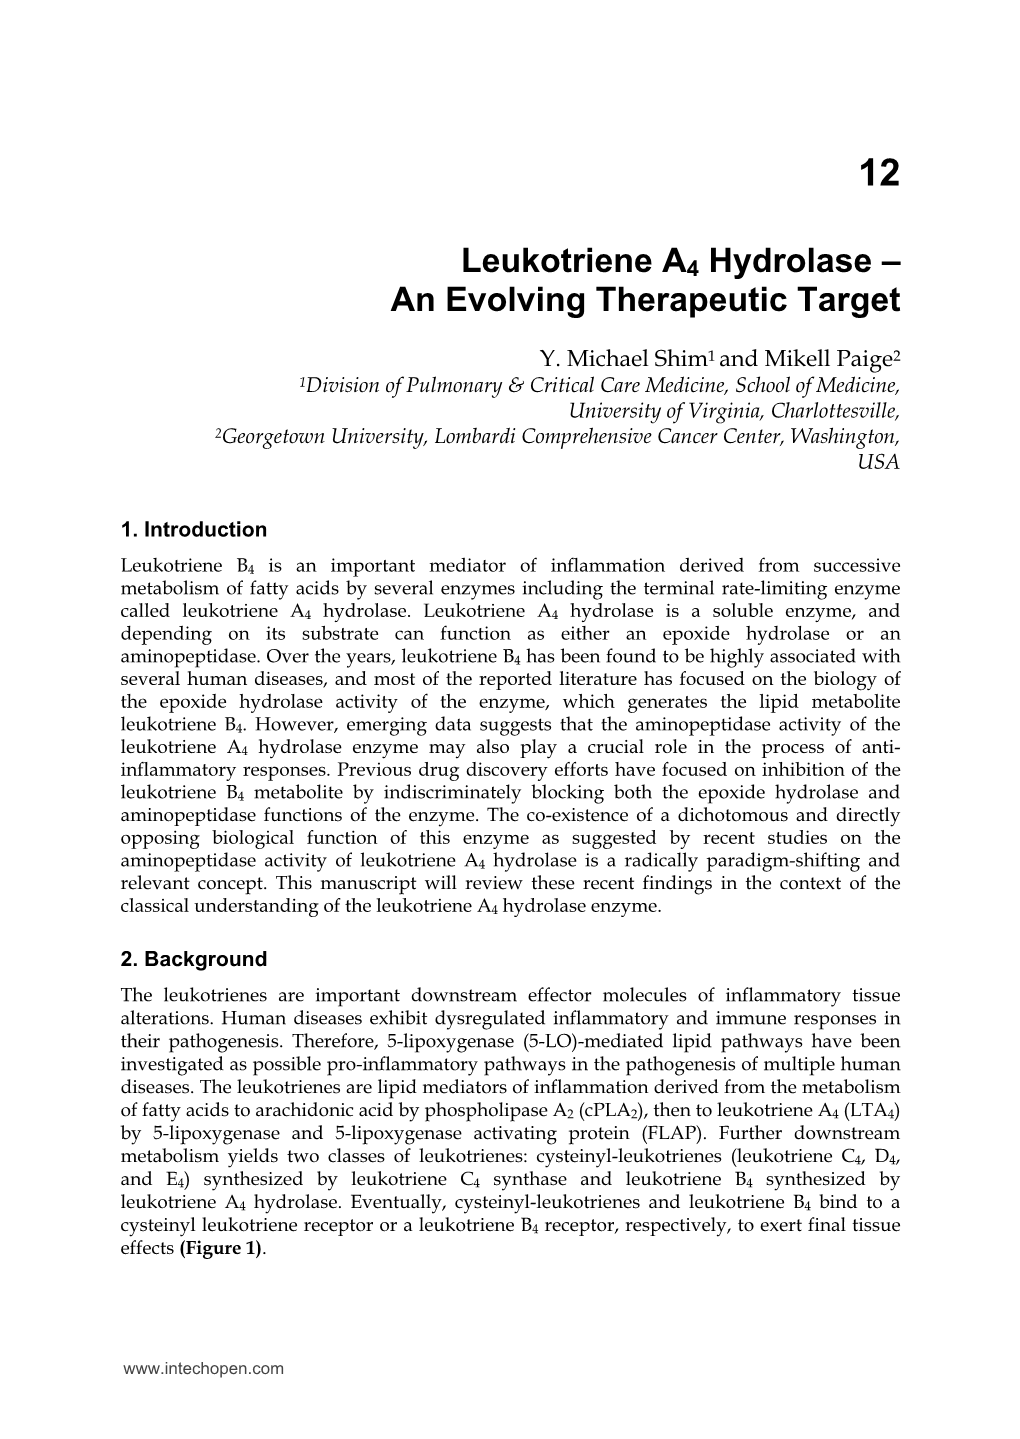 Leukotriene A4 Hydrolase – an Evolving Therapeutic Target